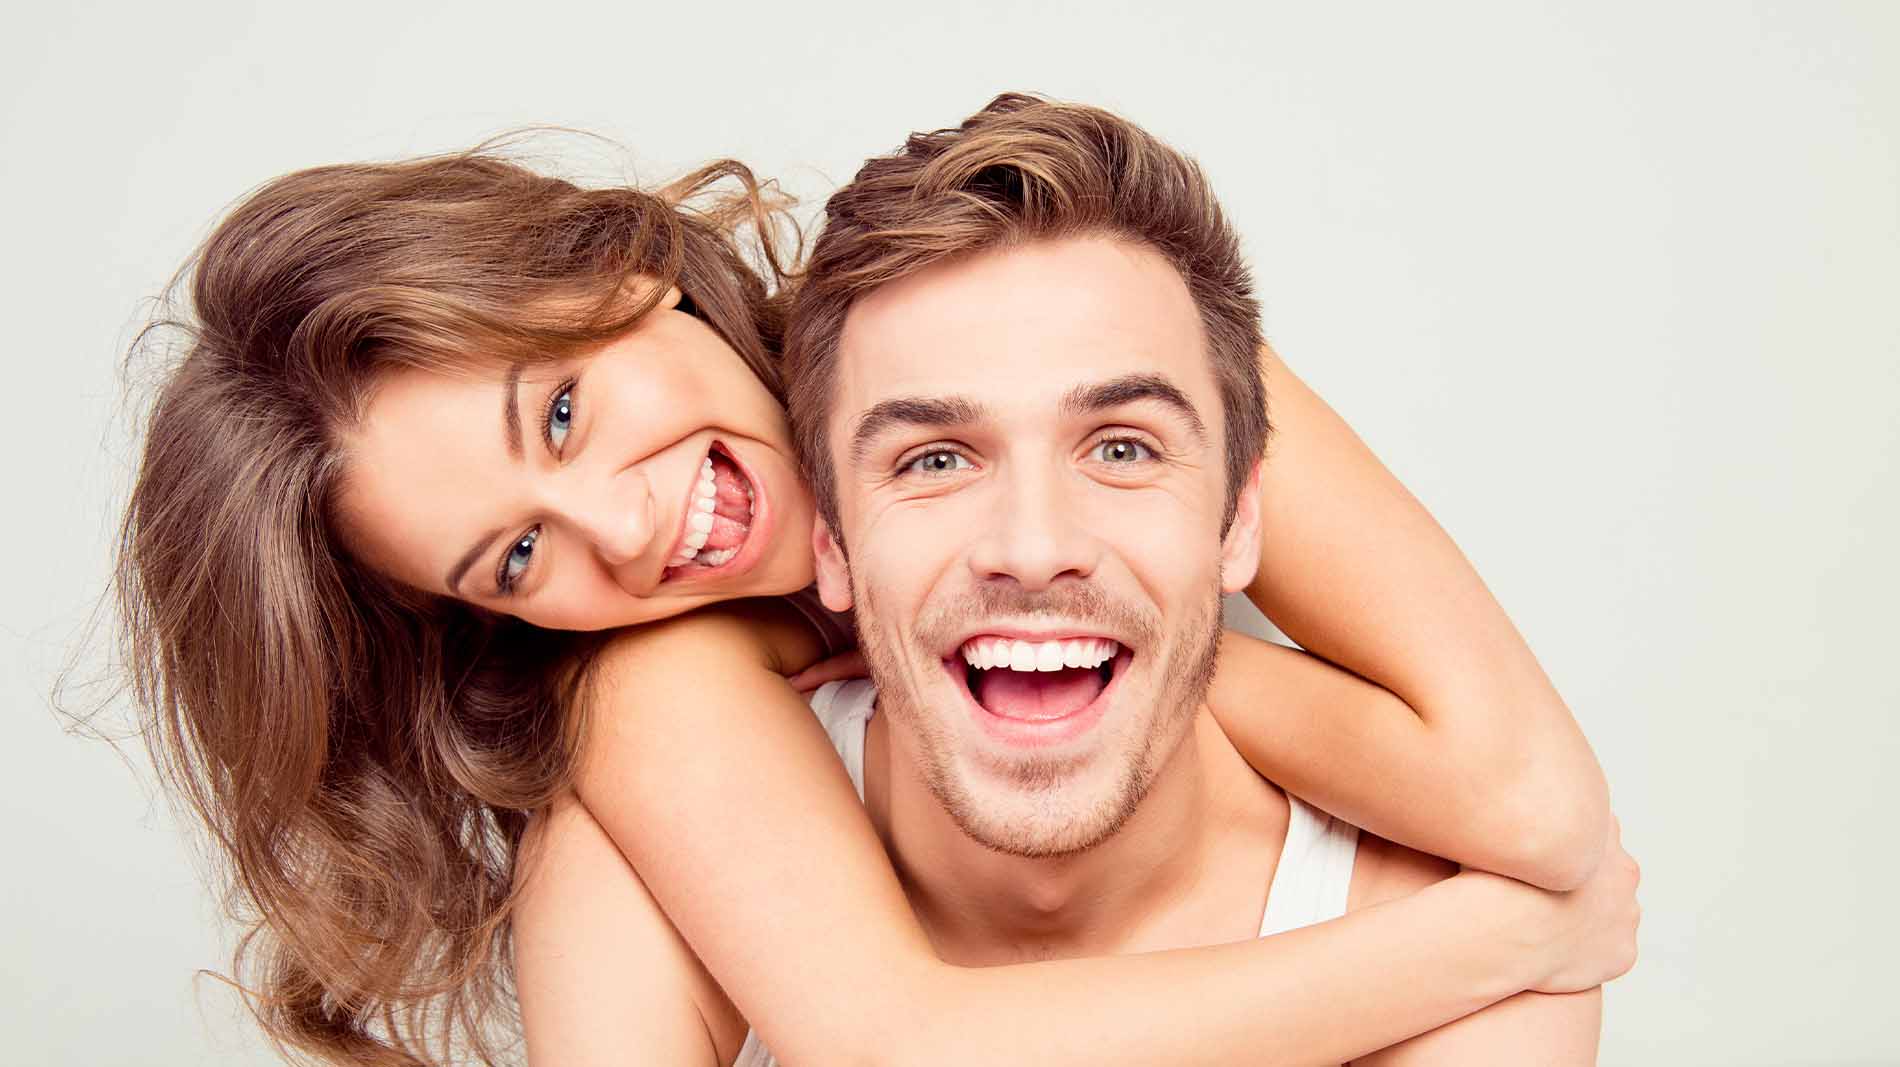 Revitalize your smile with Professional Teeth Whitening